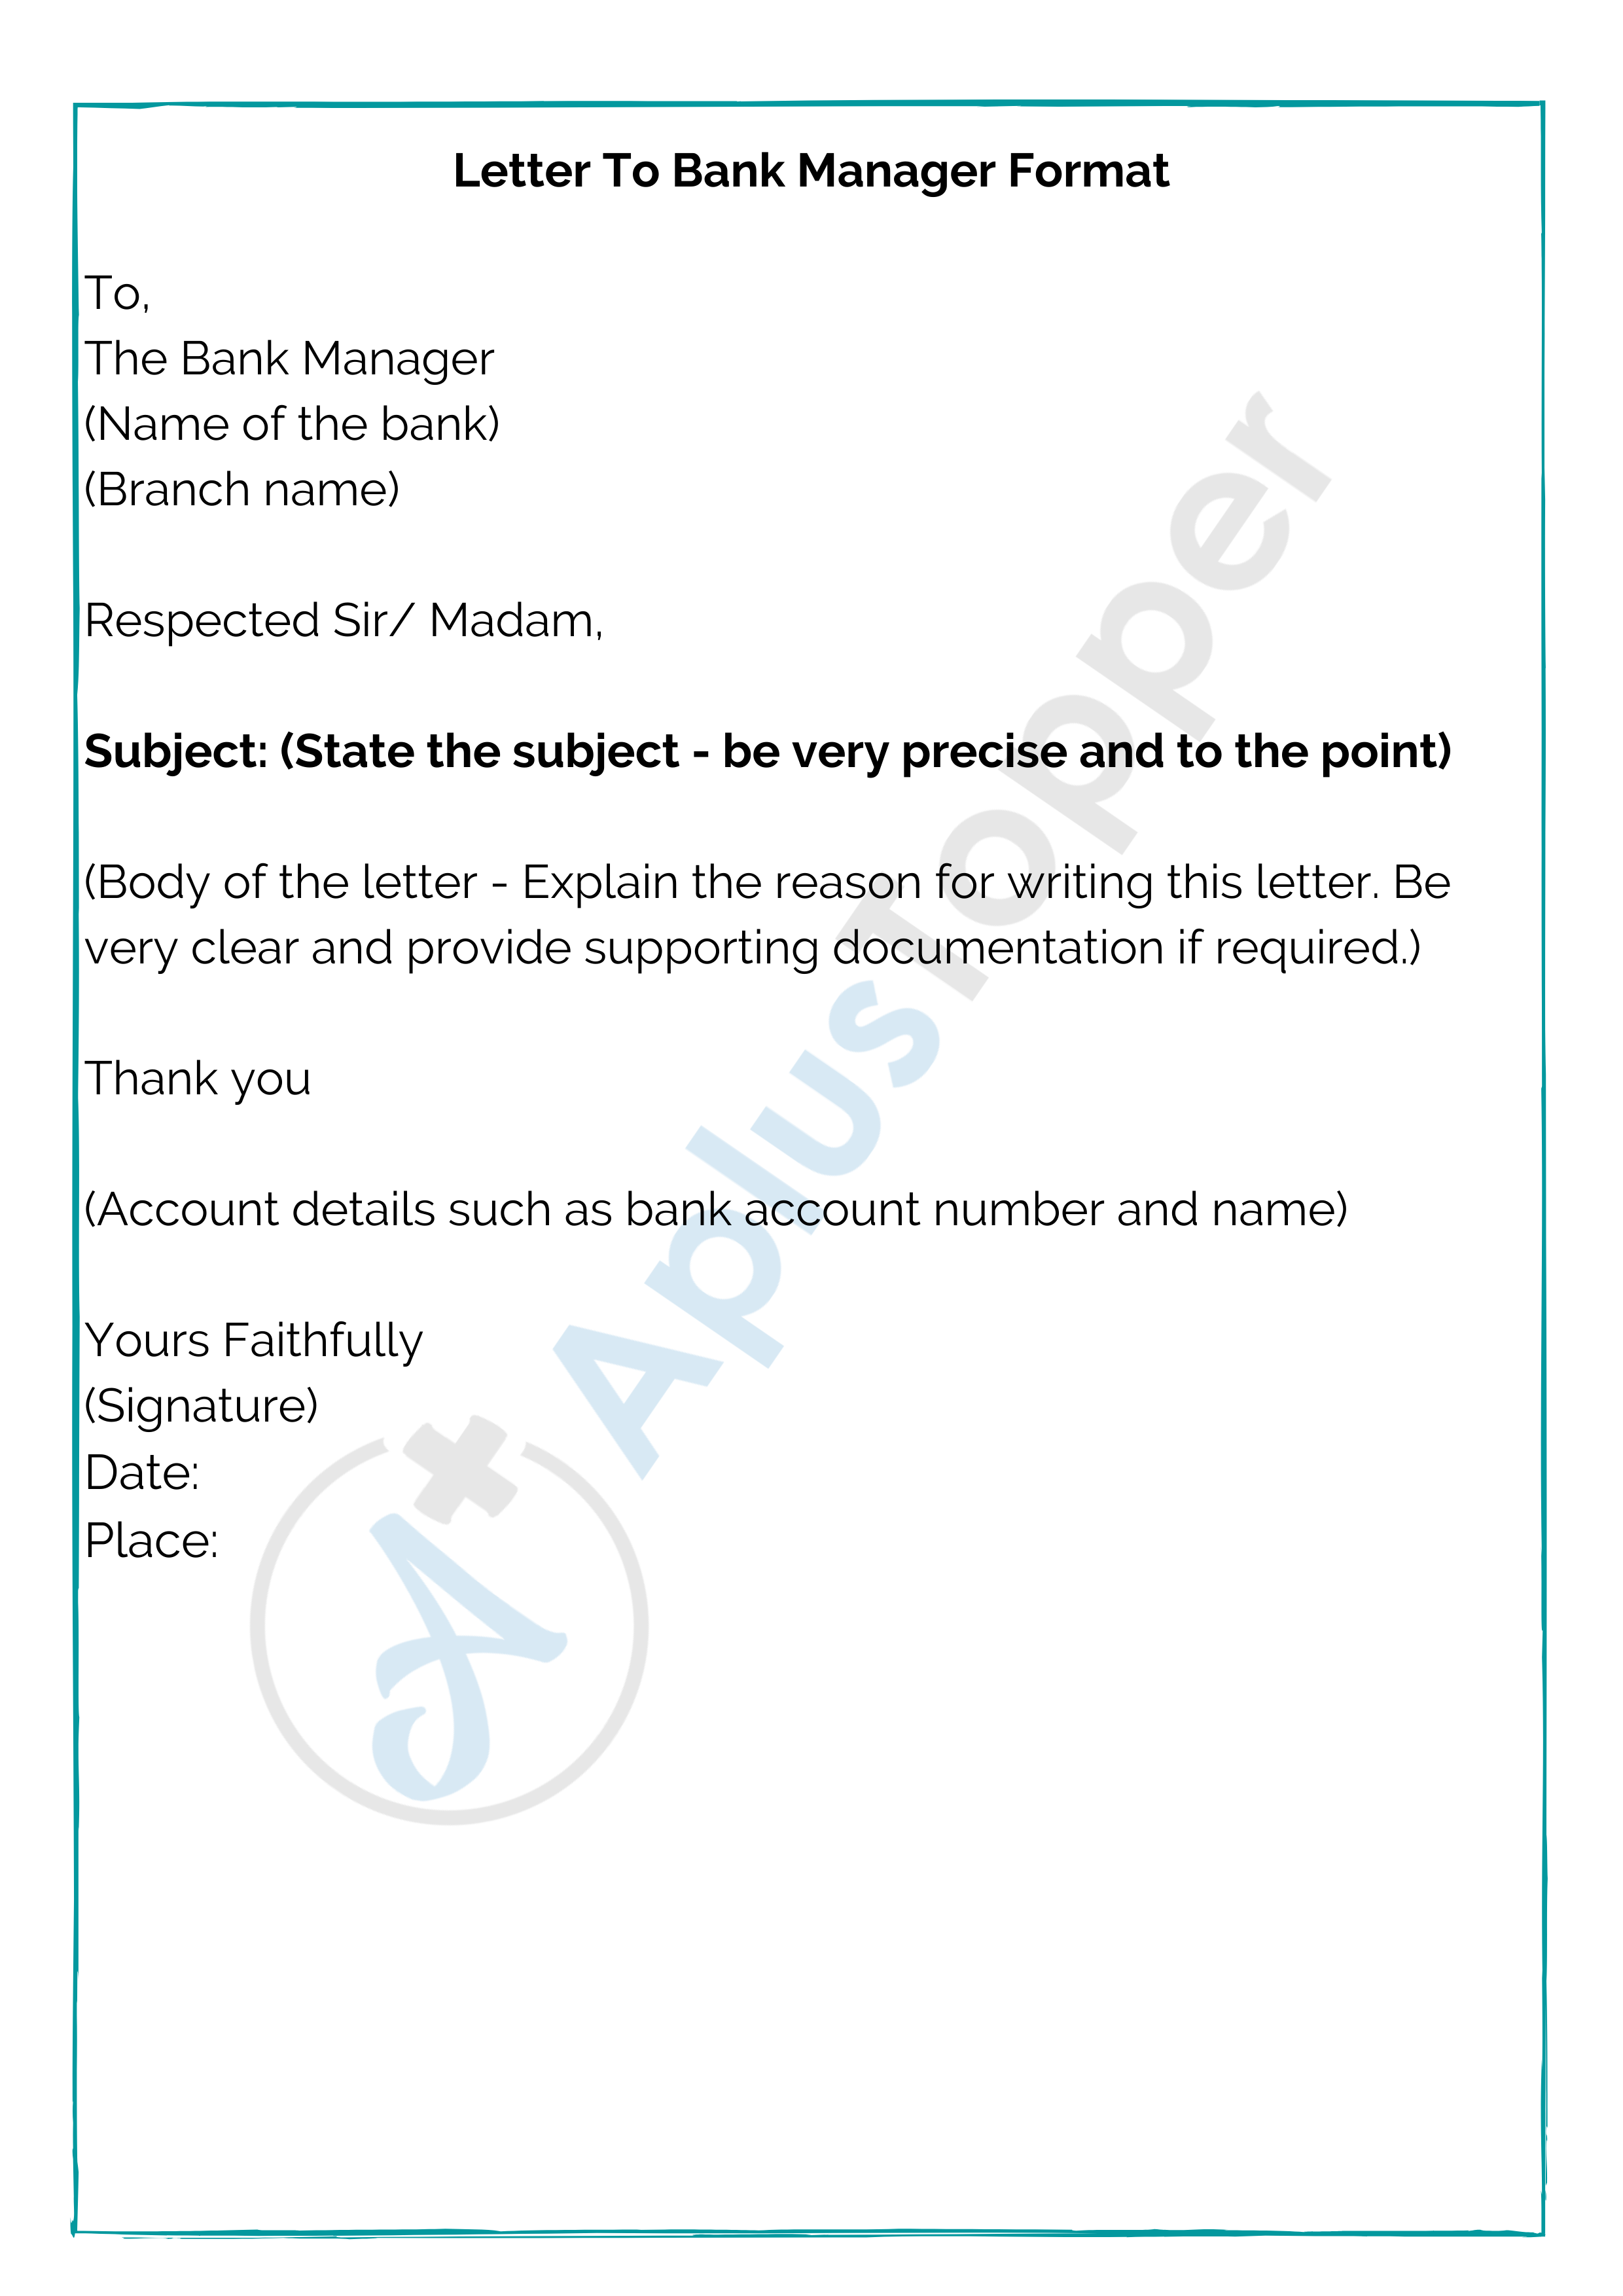 Letter To Bank Format